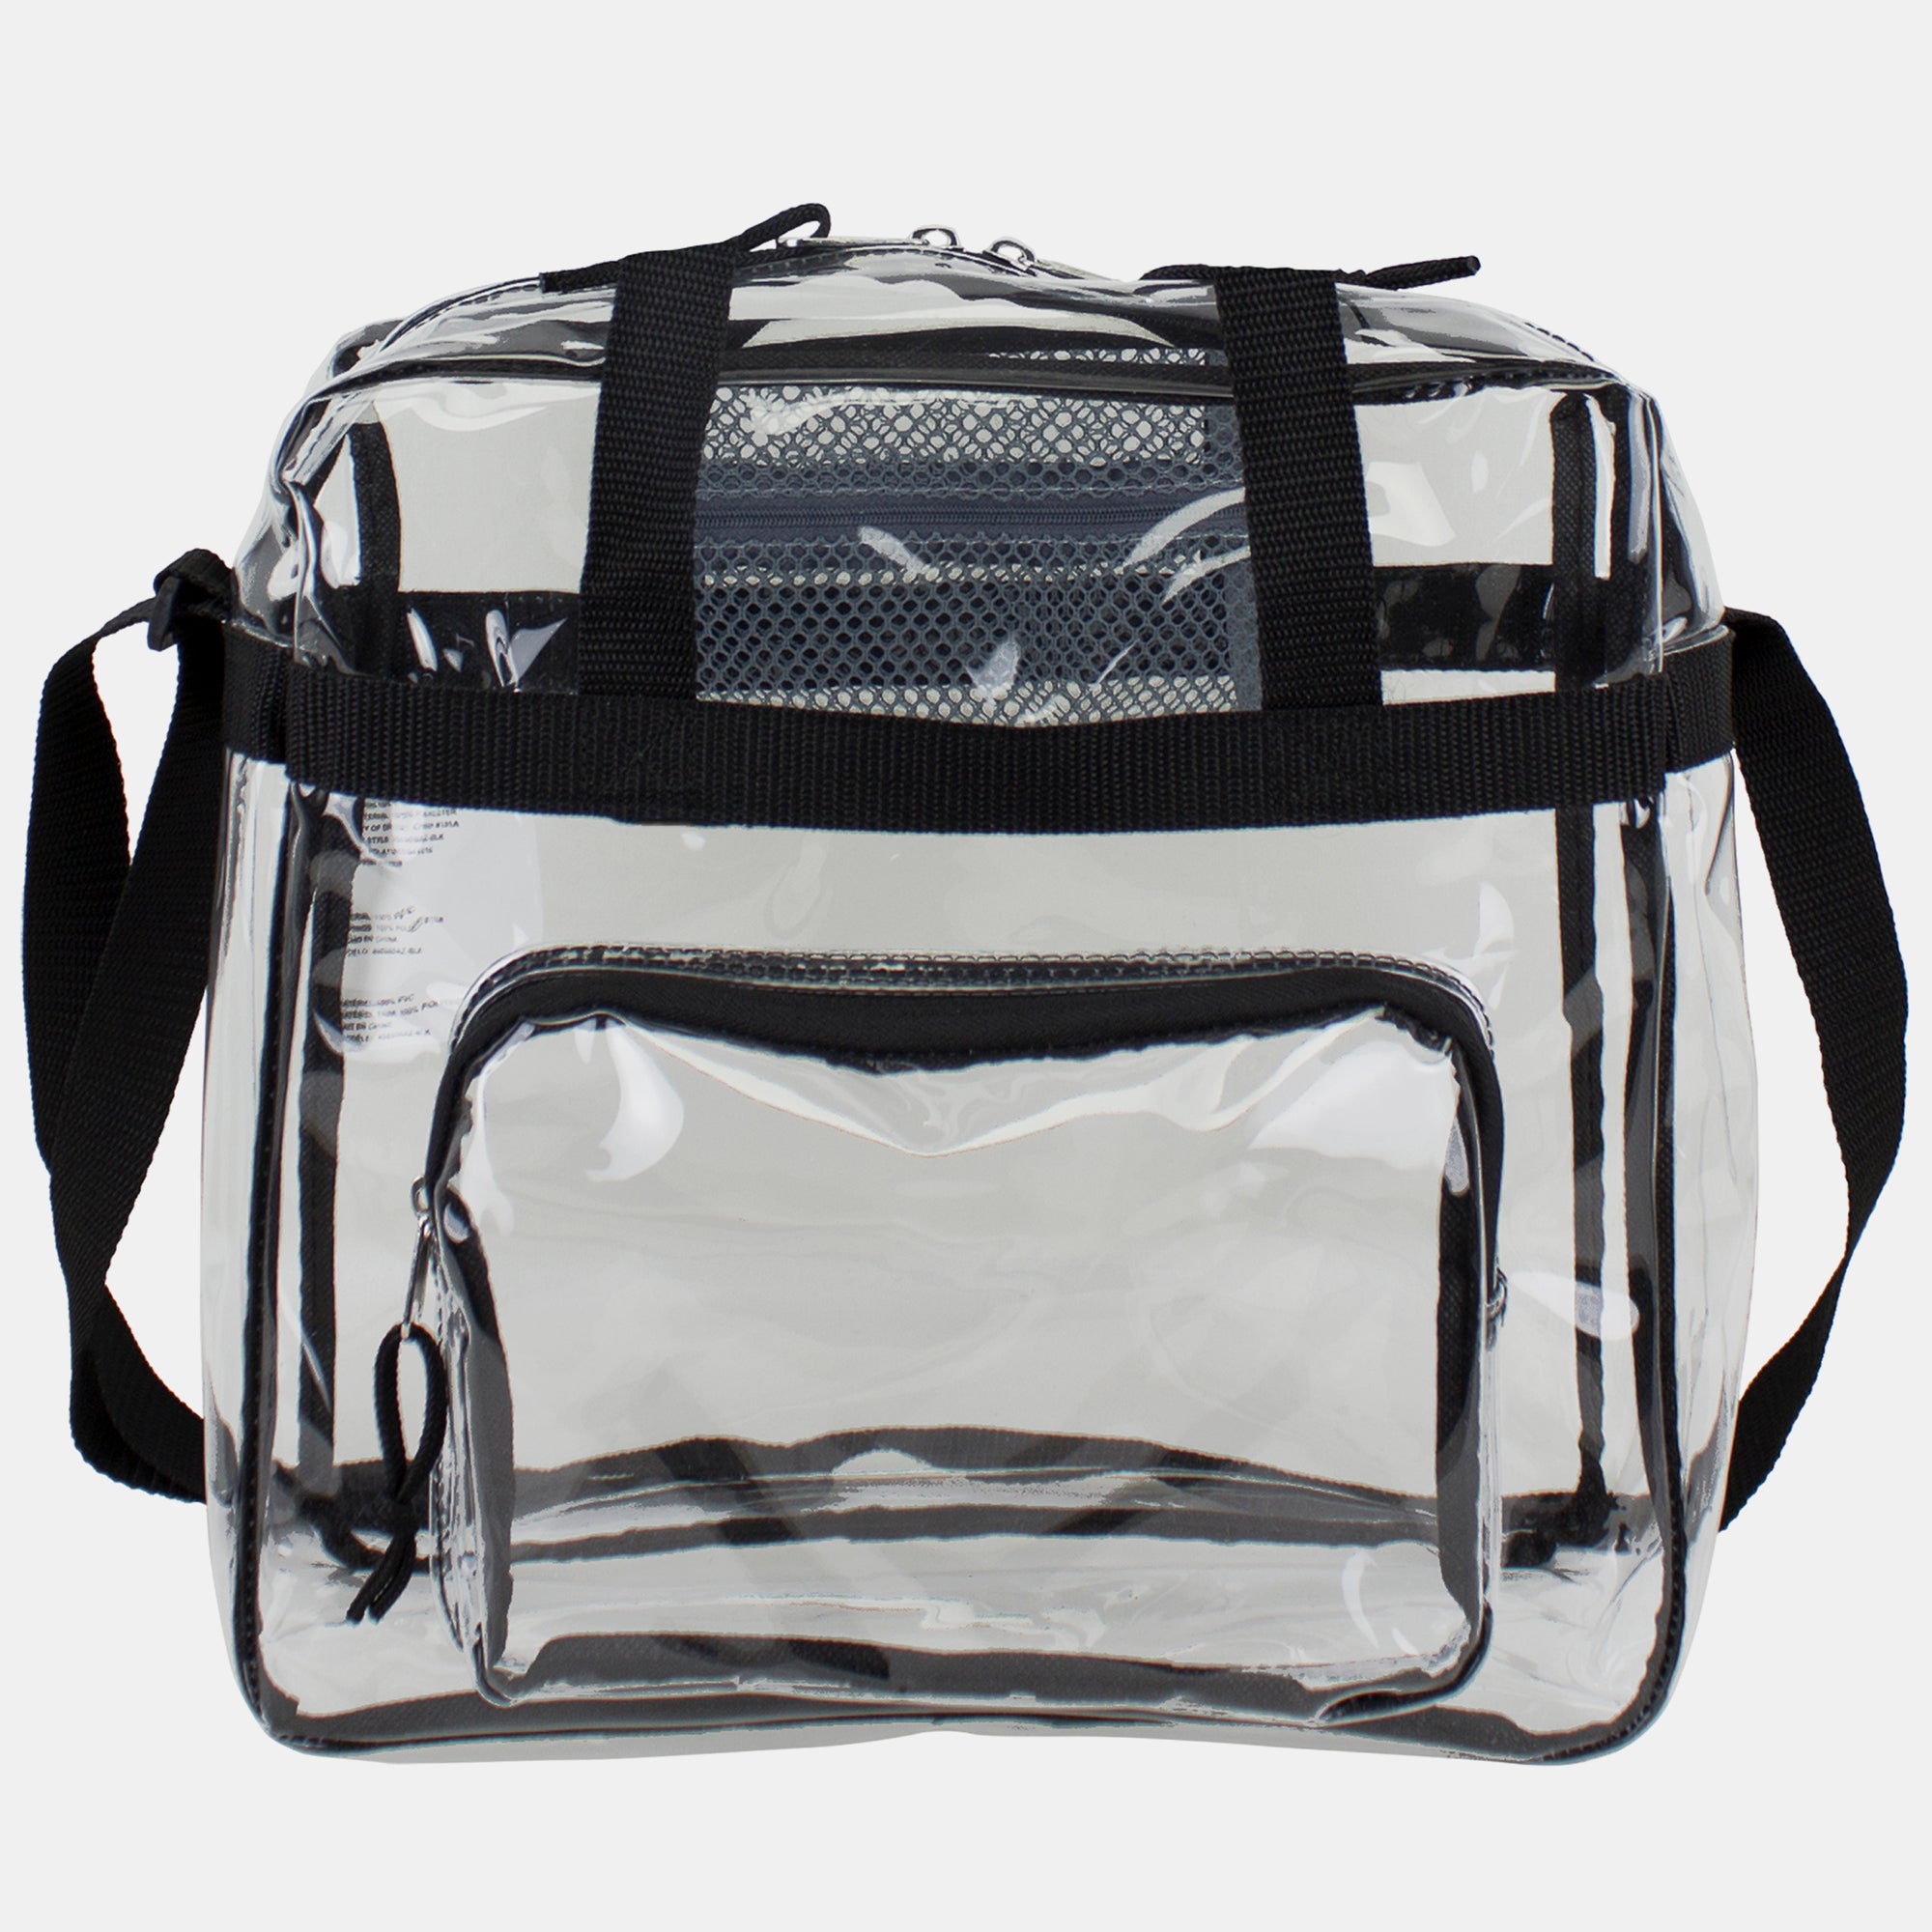 The 11 Best Stadium-Approved Clear Bags of 2023